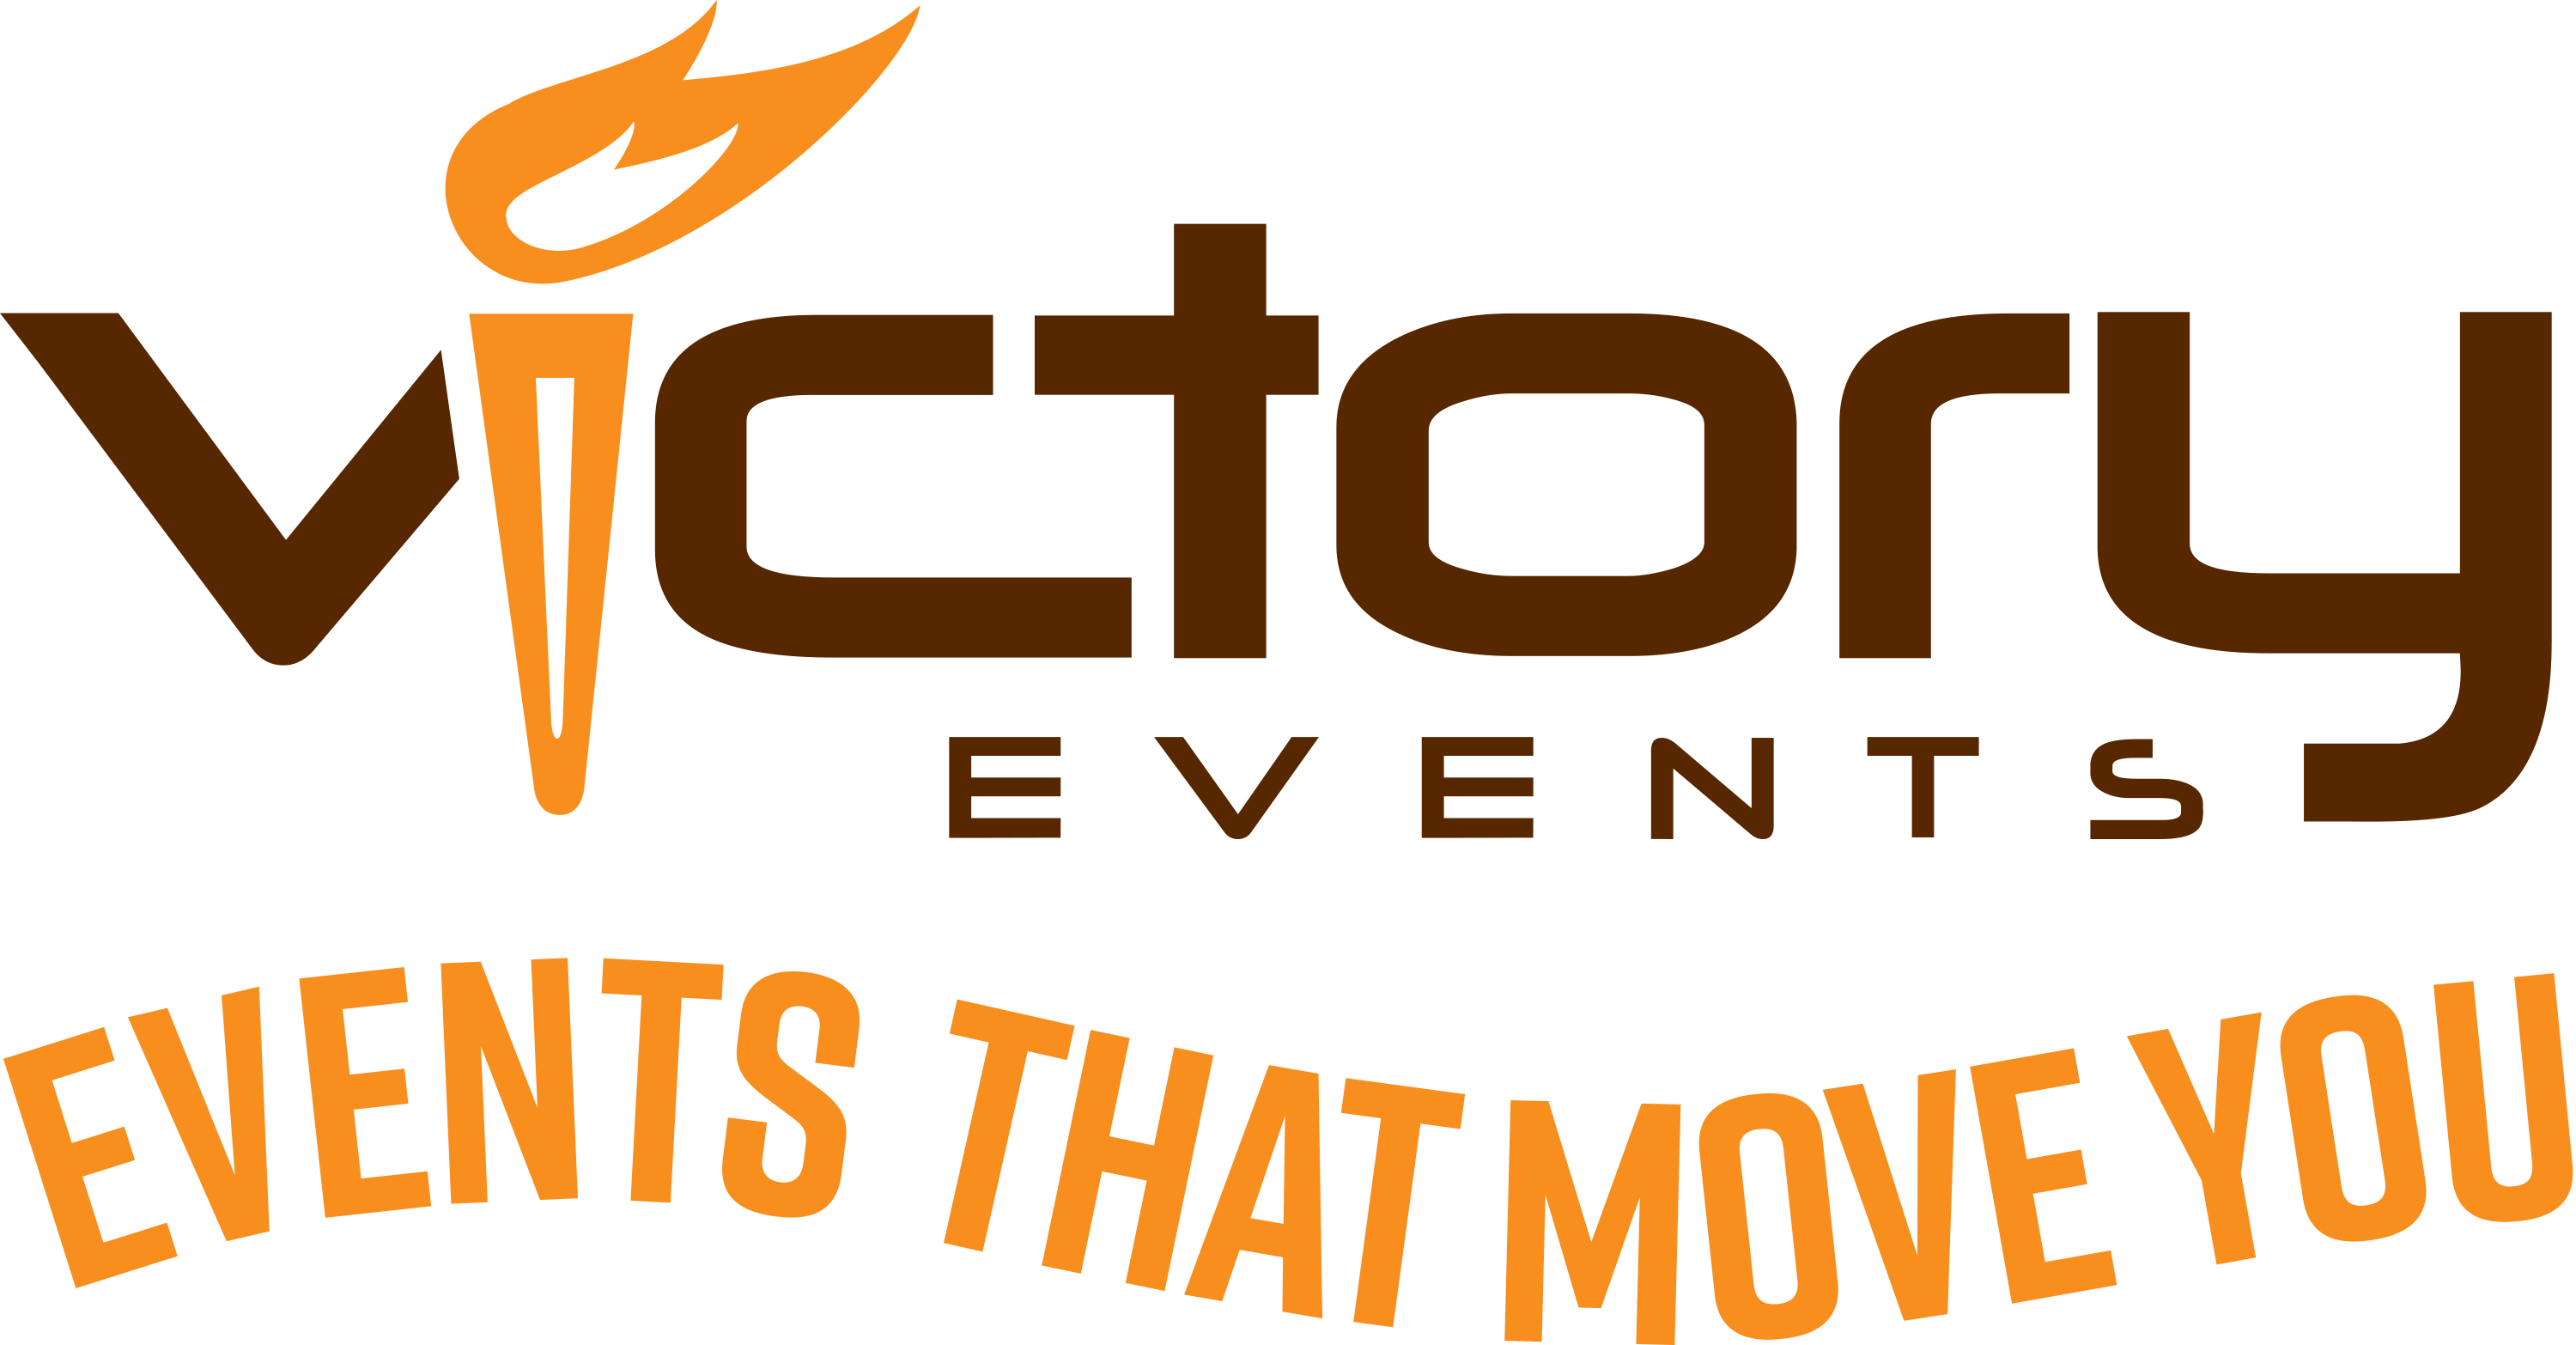 Victory Events - Events that Move You